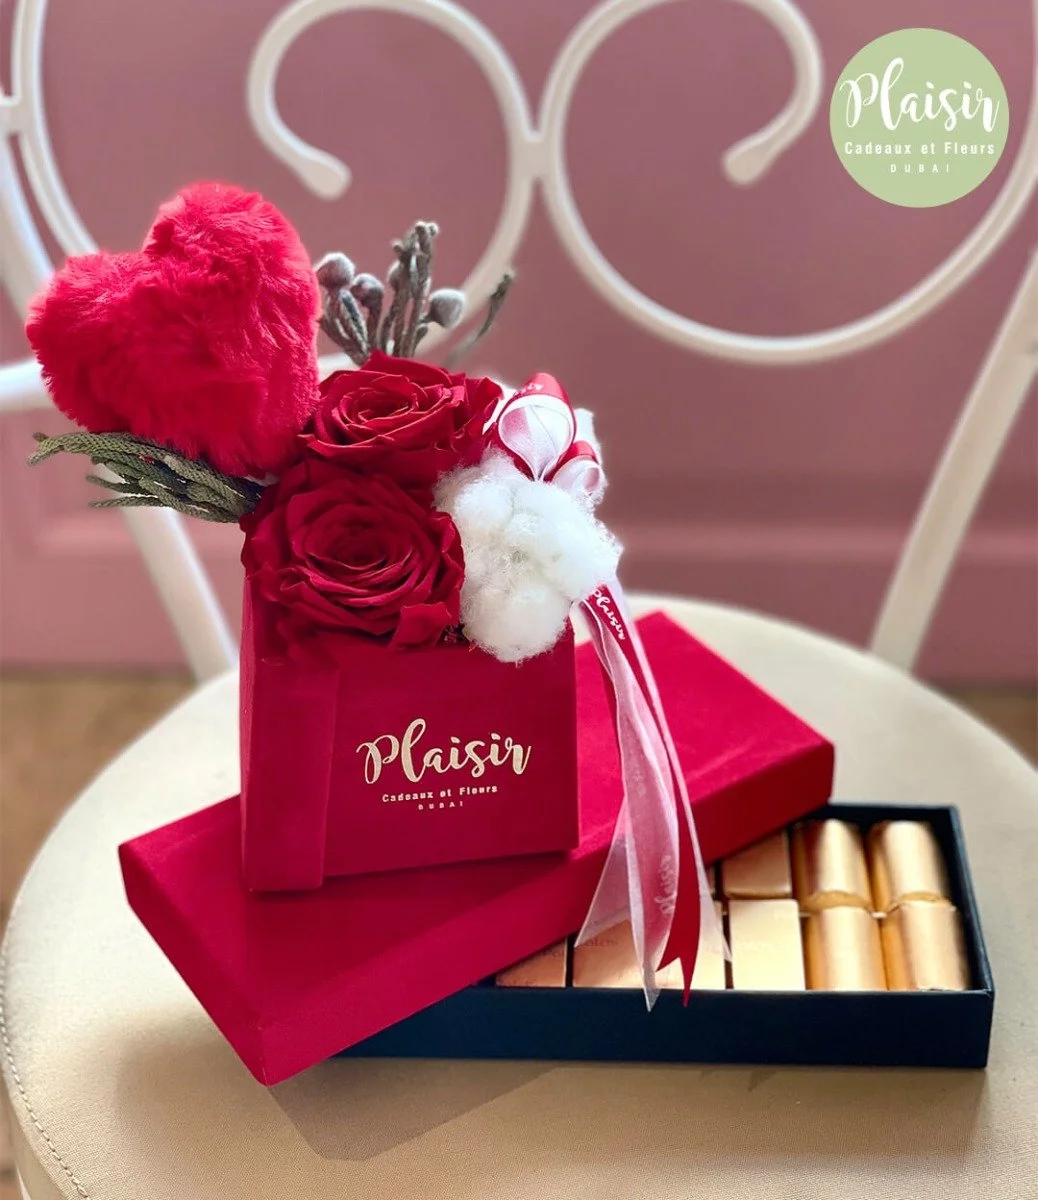 Double Infinity Rose and Patchi Chocolate Giftset in Red by Plaisir